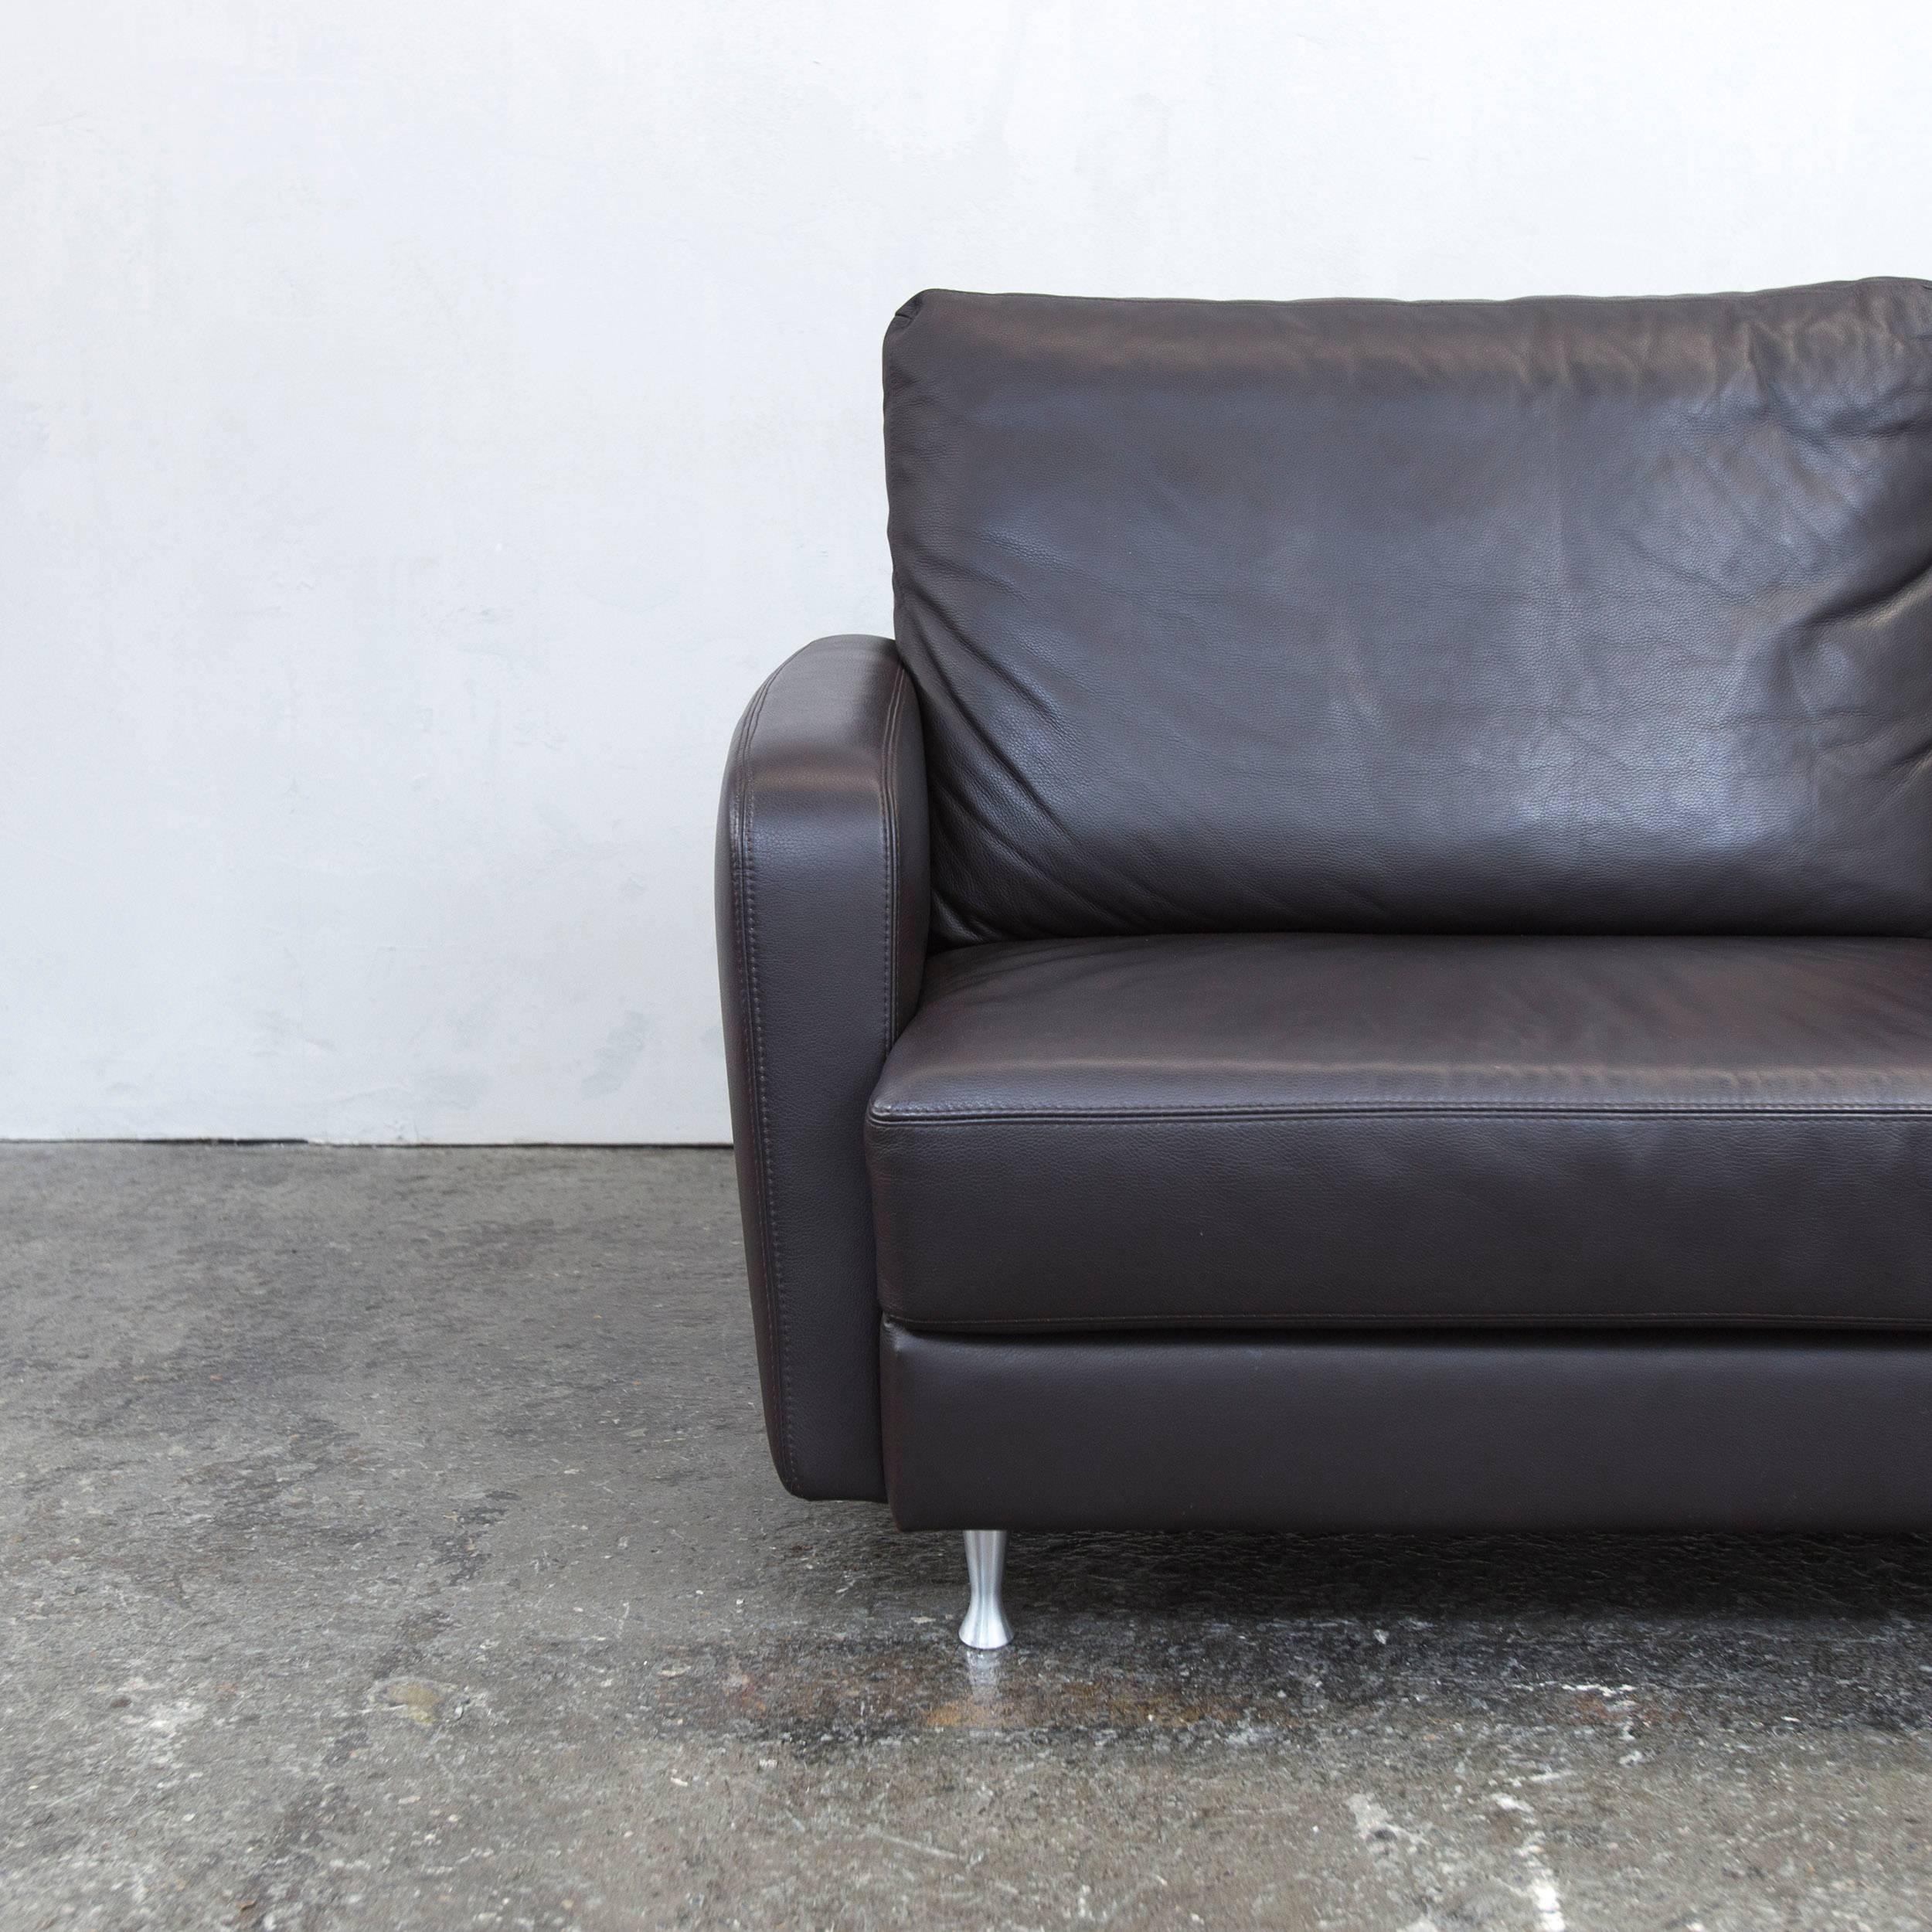 Brown colored original Ewald Schillig designer leather sofa in a minimalistic and modern design, made for pure comfort.